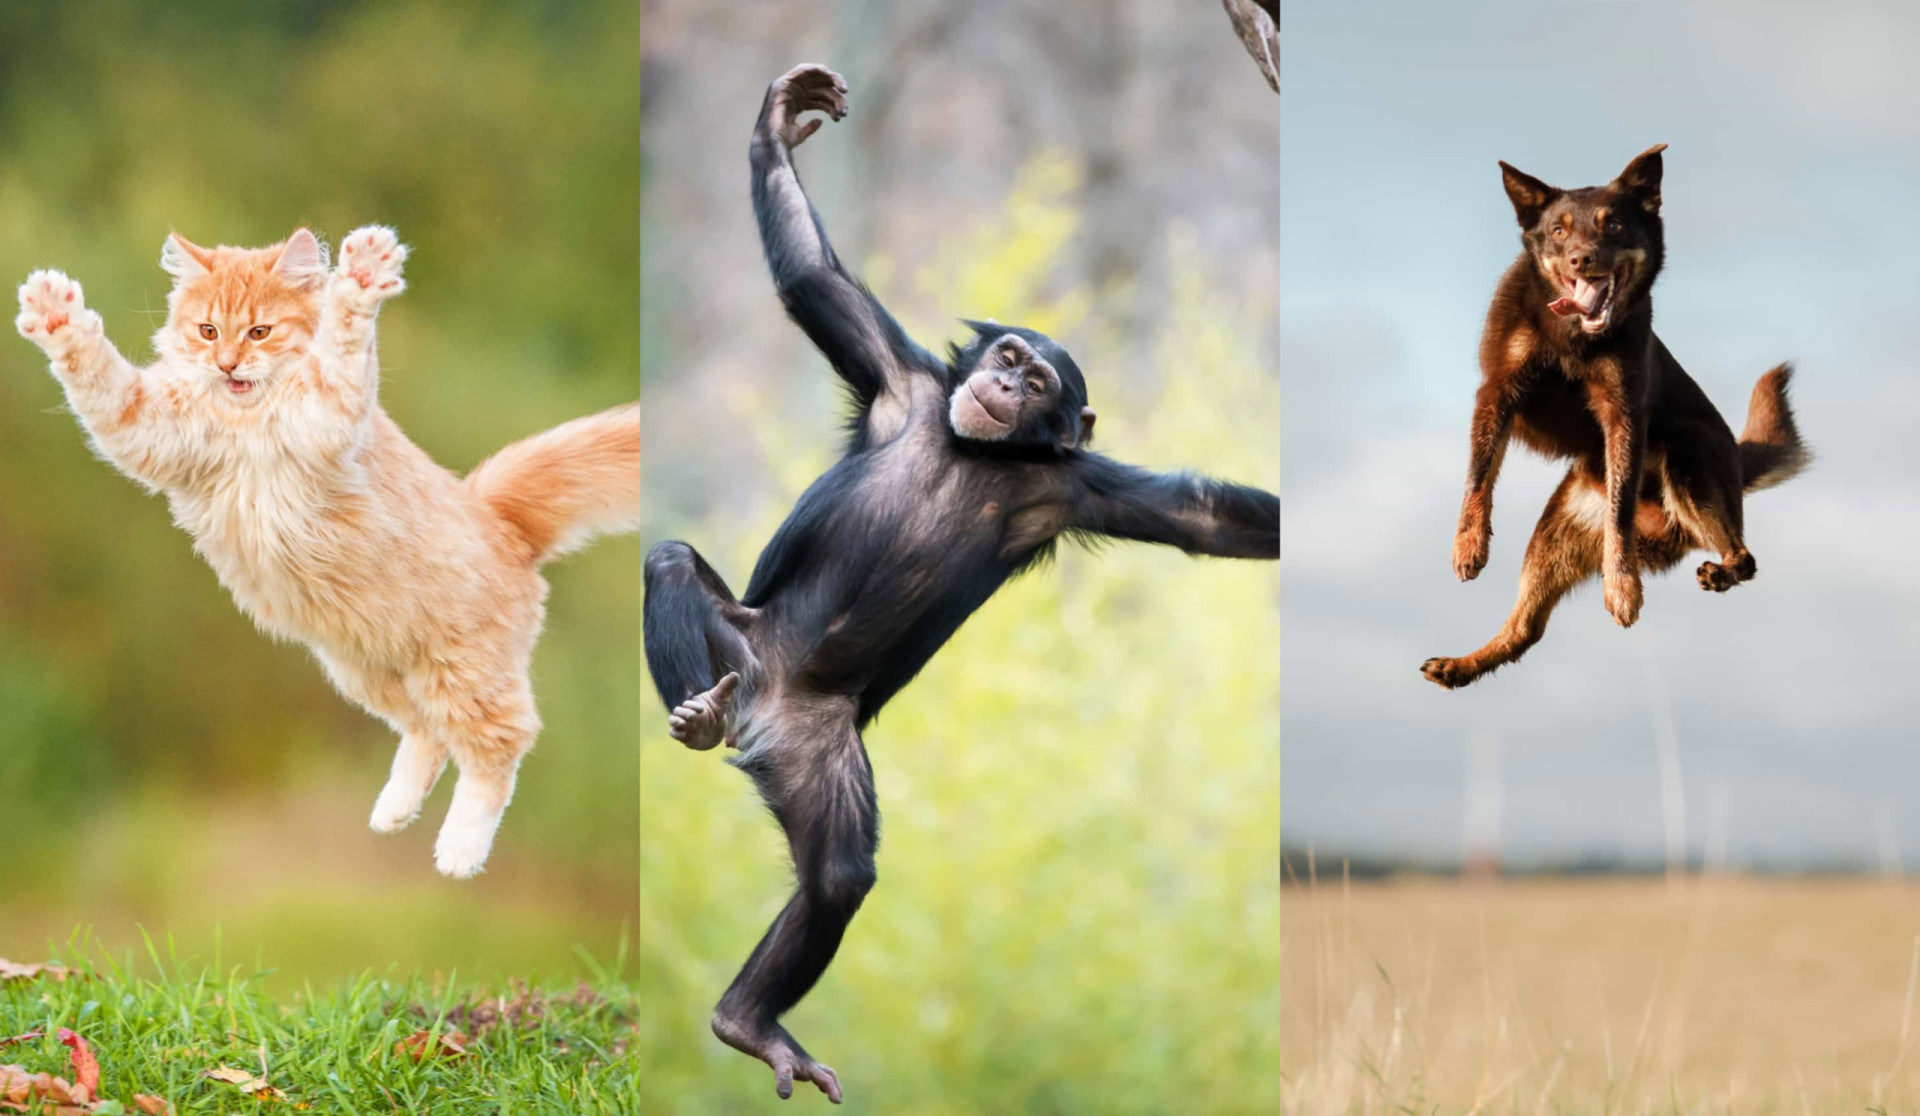 Perfectly-timed photos of animals defying gravity